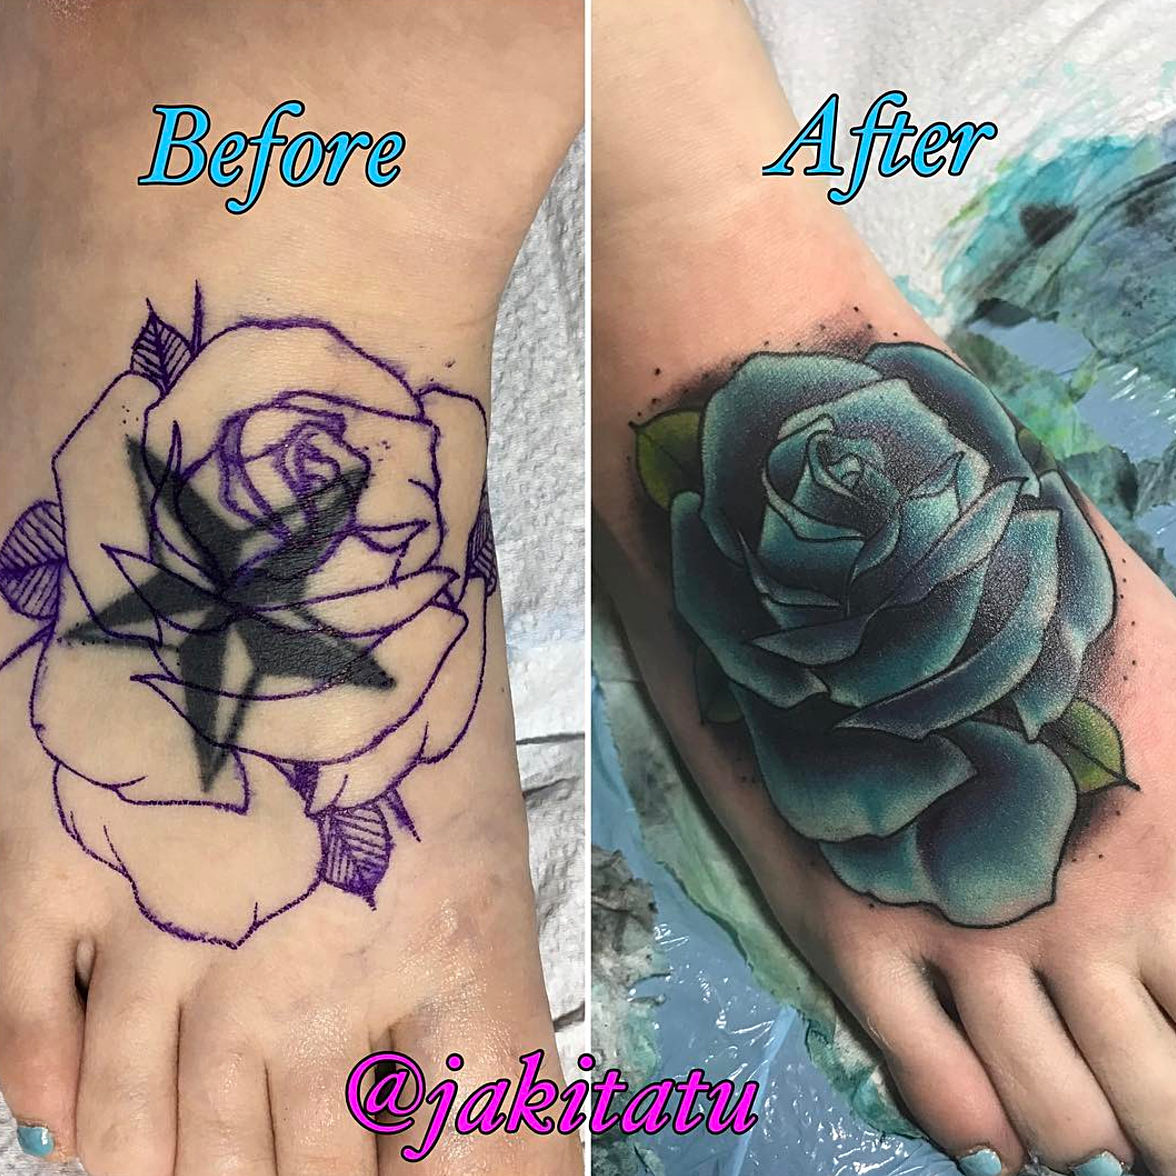 Roses tattoo cover up  YouTube